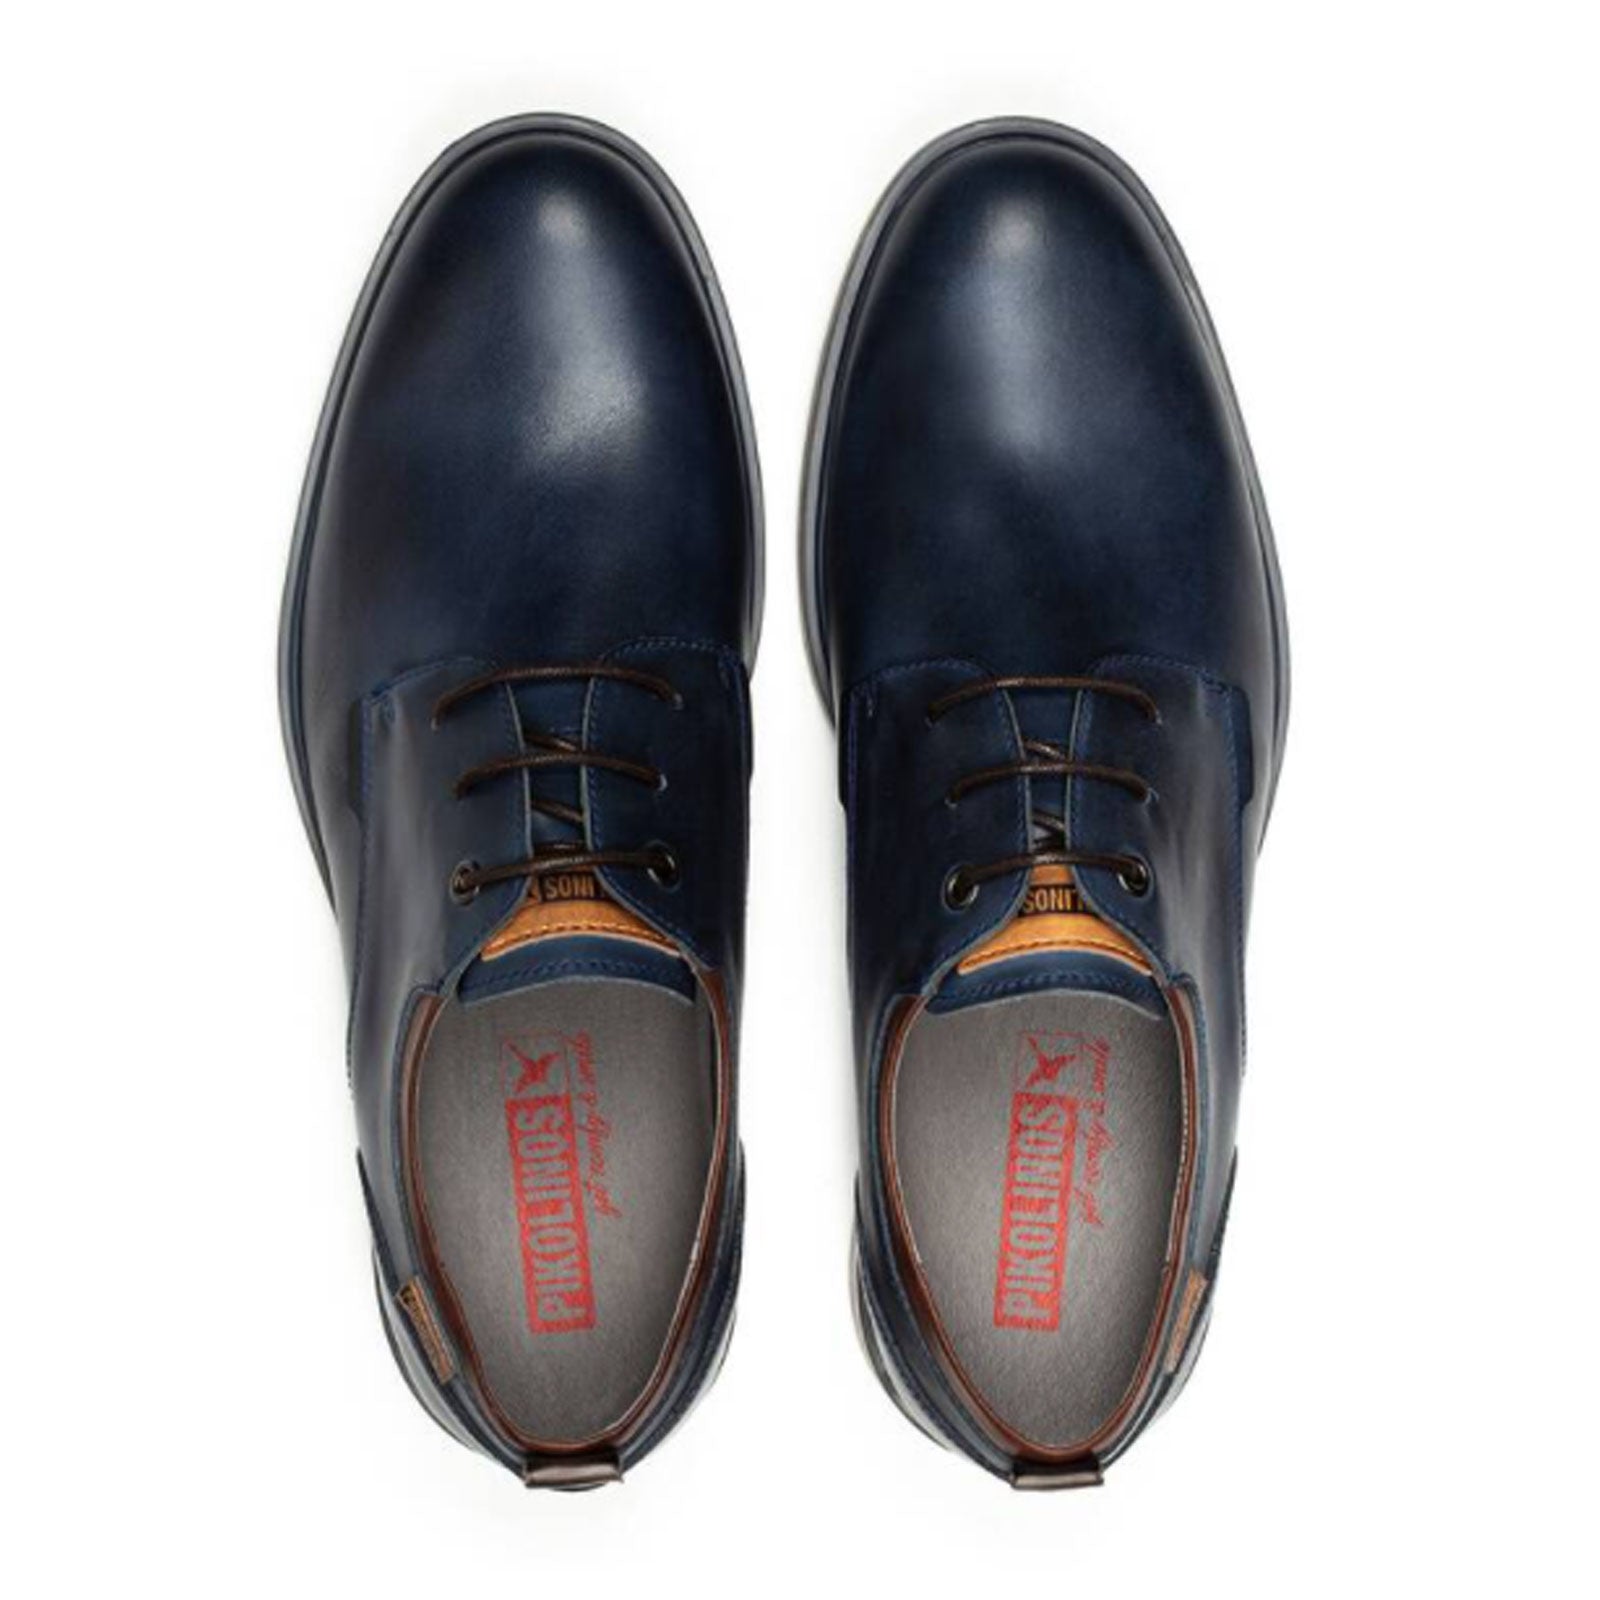 Pikolinos Corcega M2P-4325 Lace-up (Men) - Blue Dress-Casual - Oxfords - The Heel Shoe Fitters